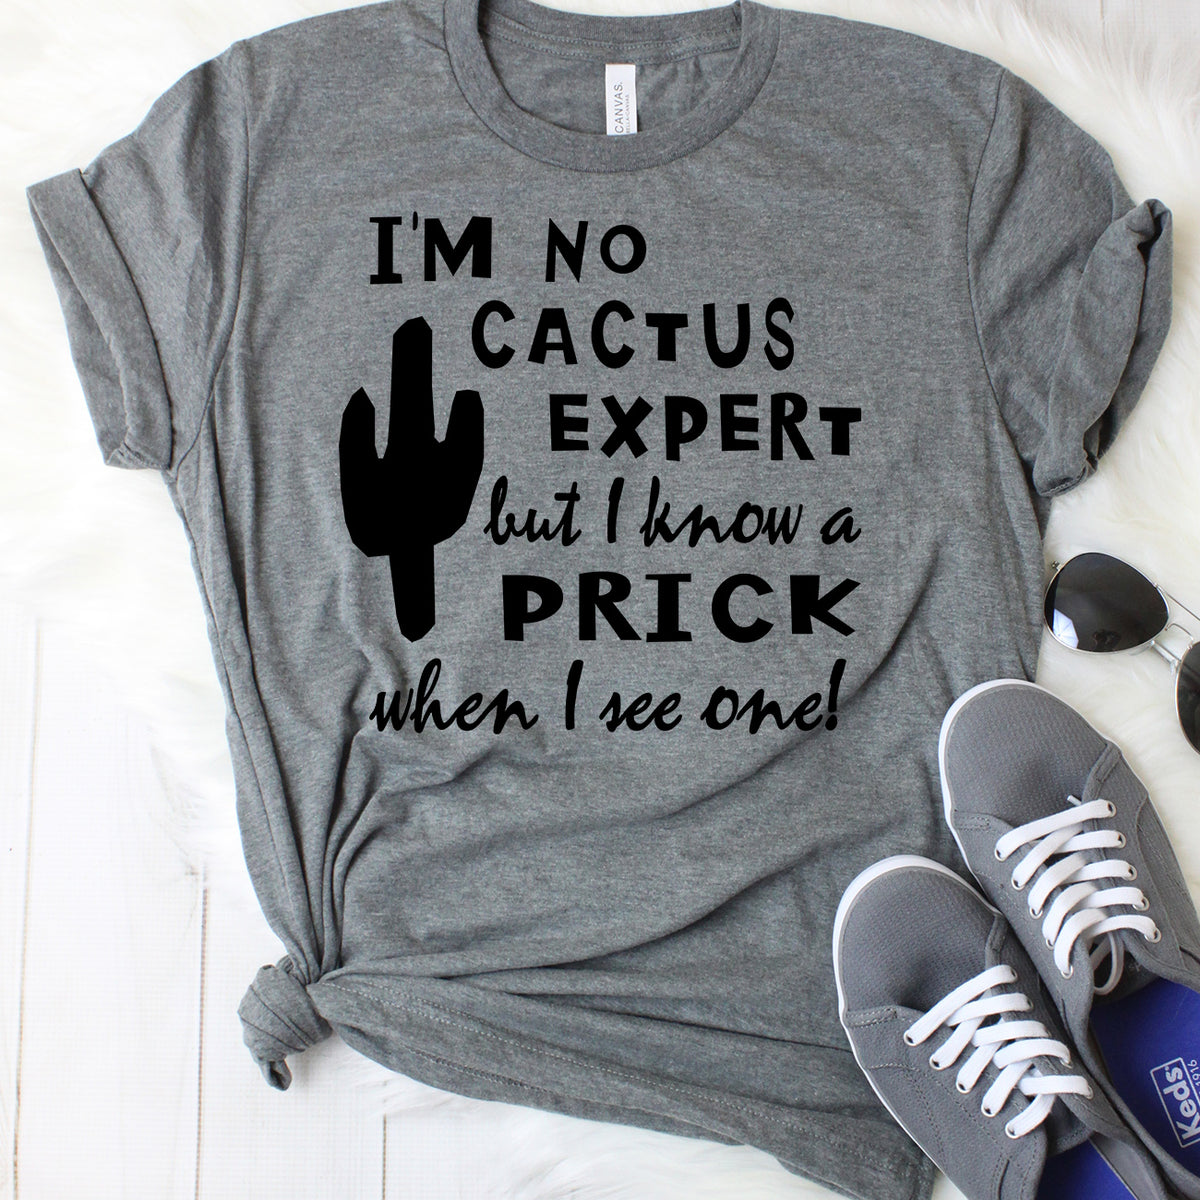 I'm No Cactus Expert But I Know a Prick When I See One Shirt T-Shirt